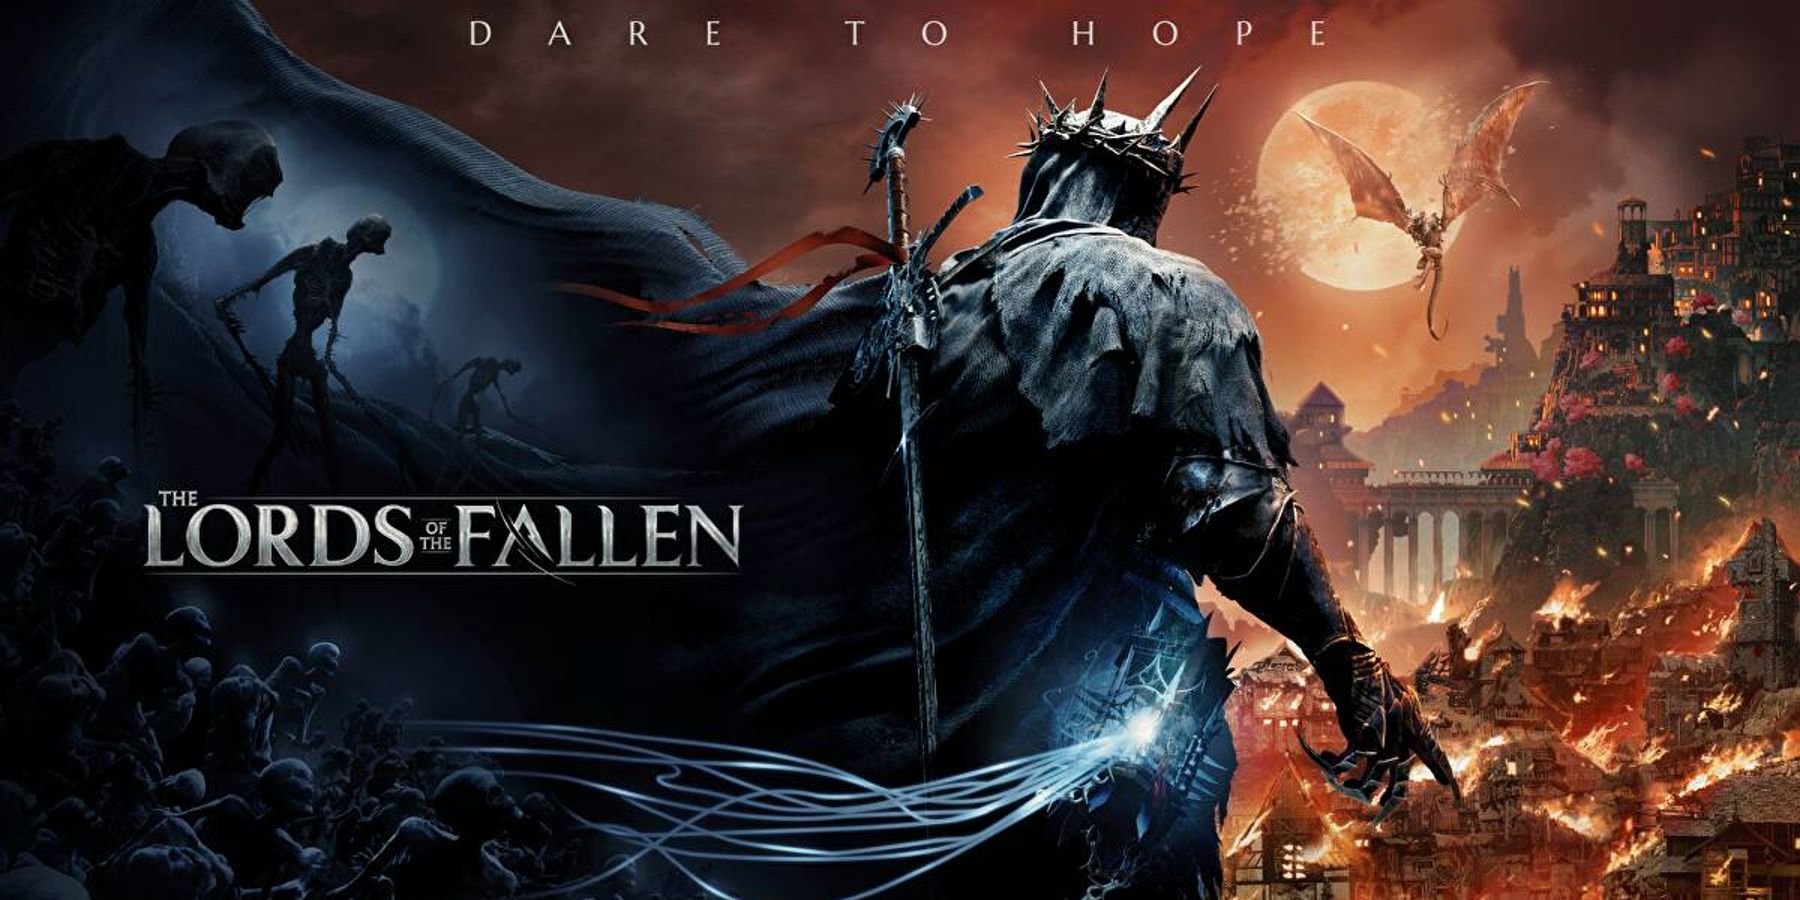 THE LORDS OF THE FALLEN POSTER